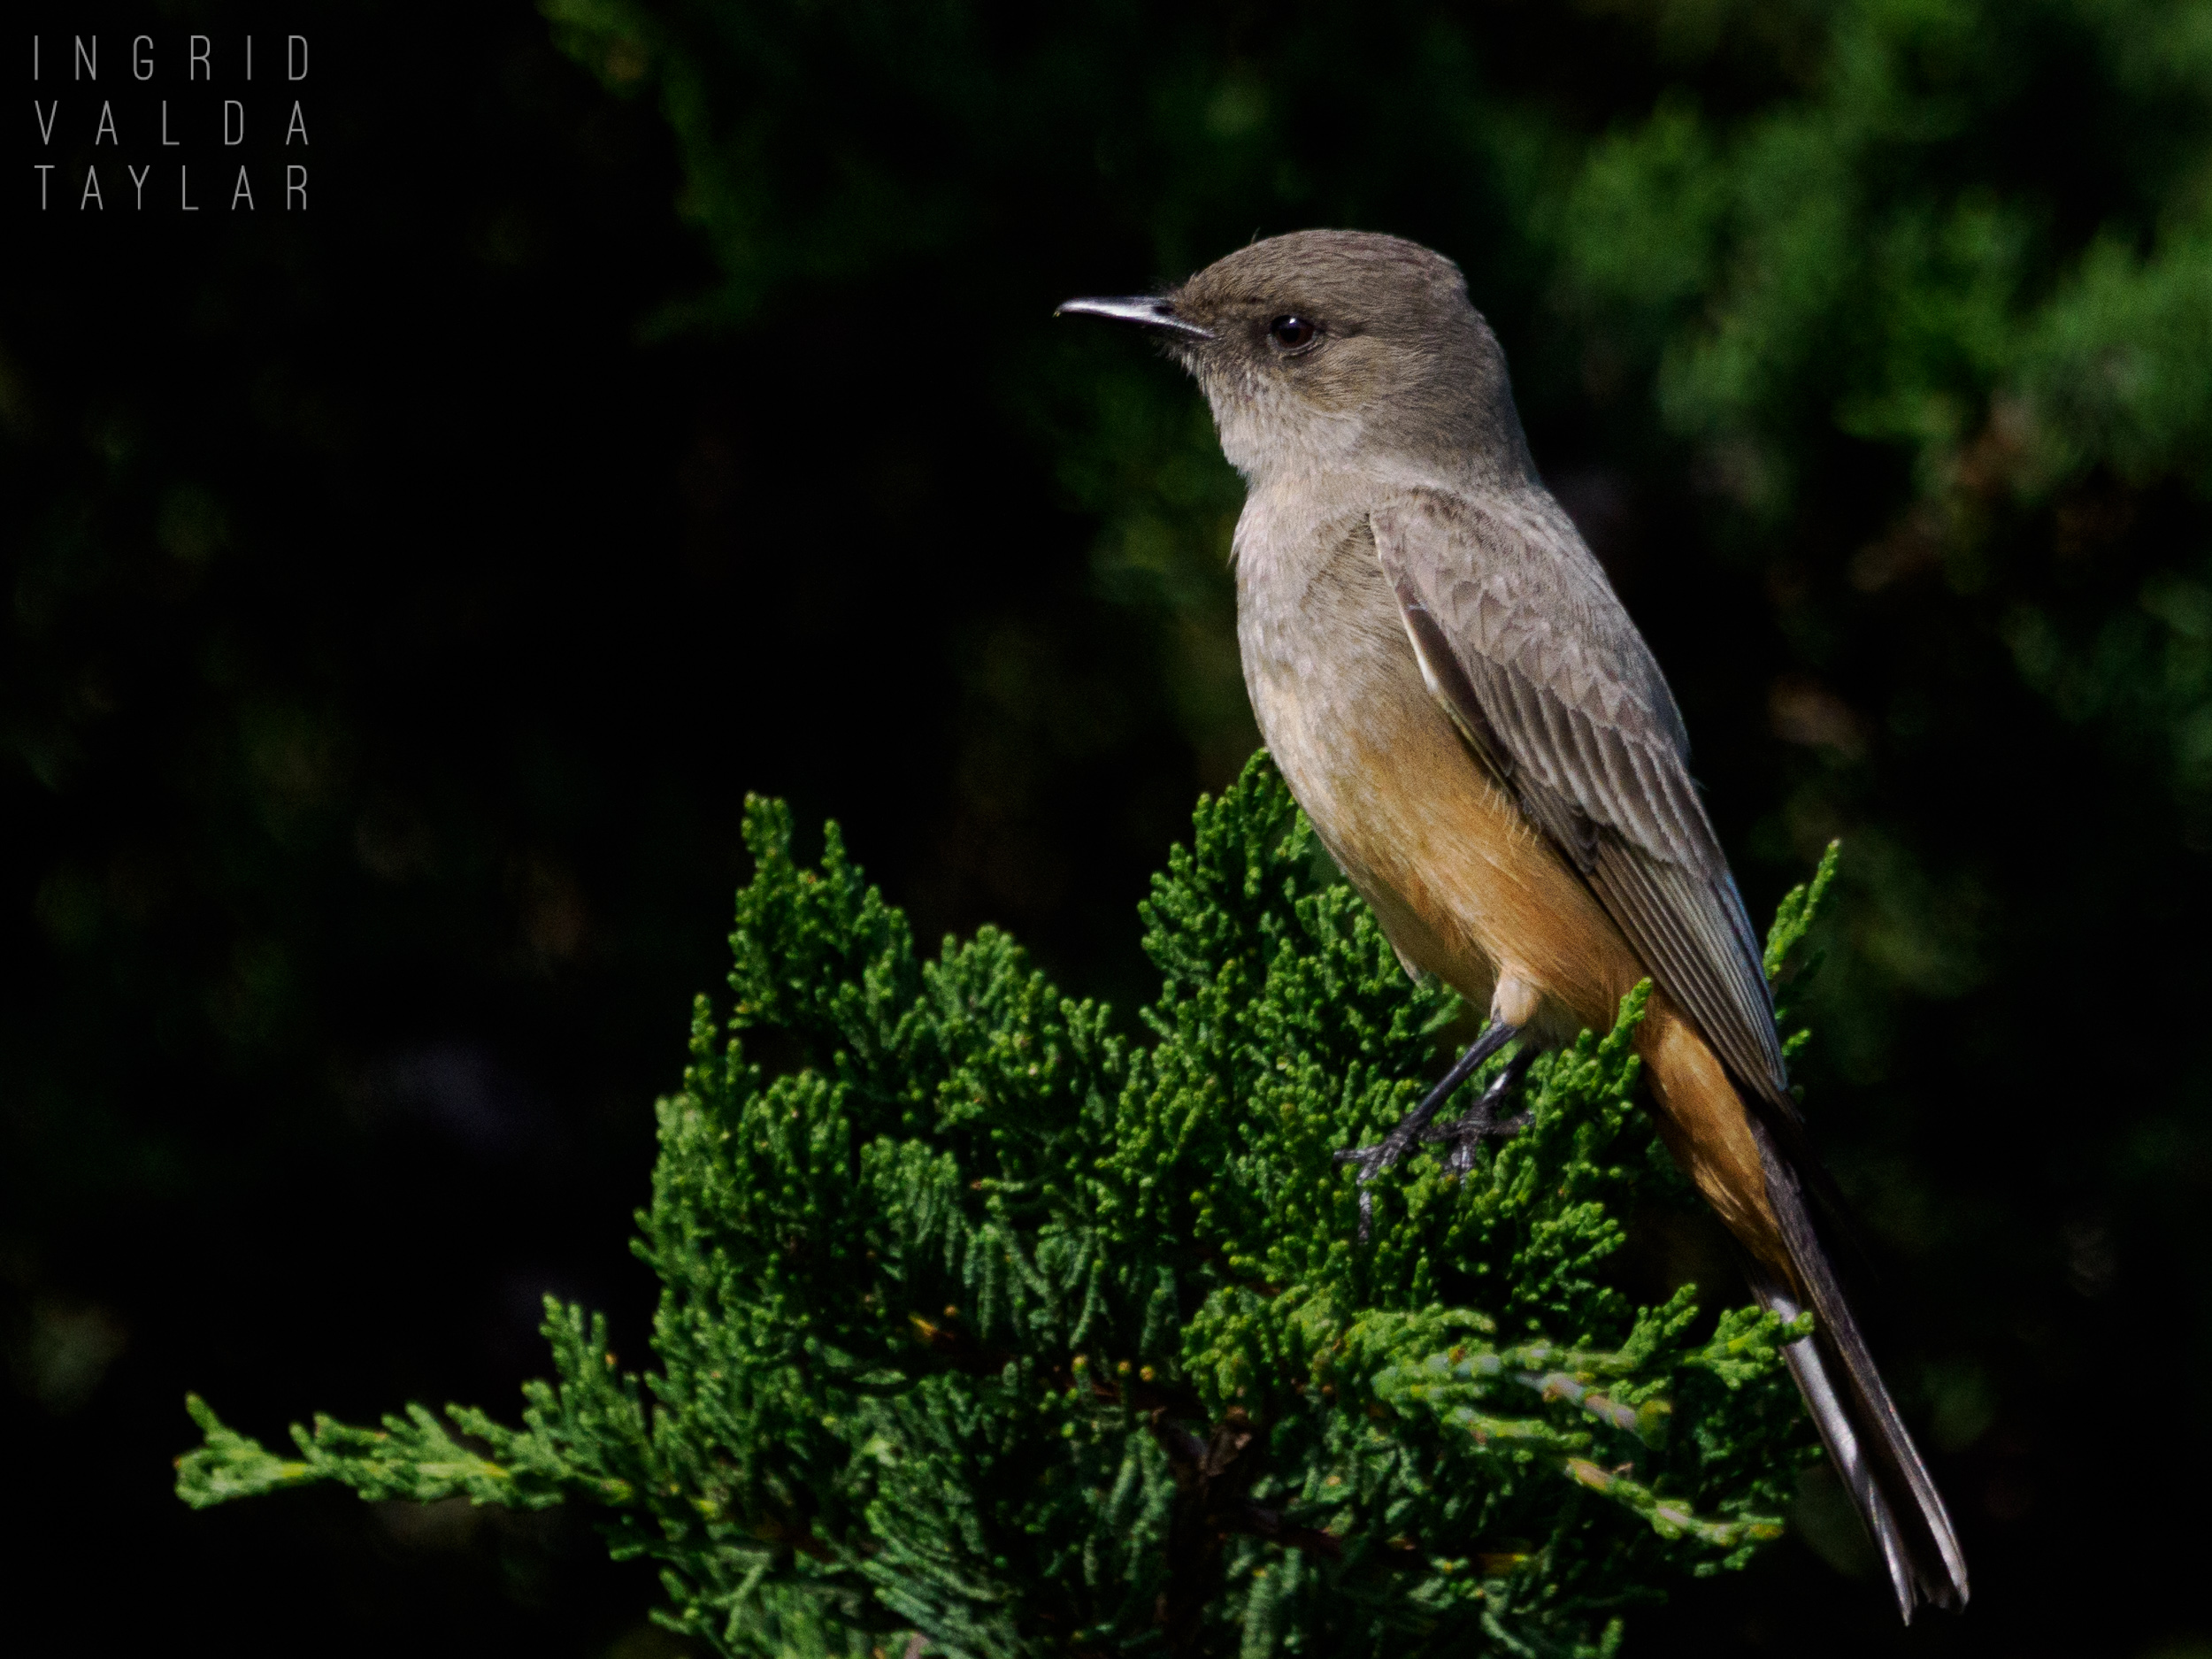 Say's Phoebe in Tree